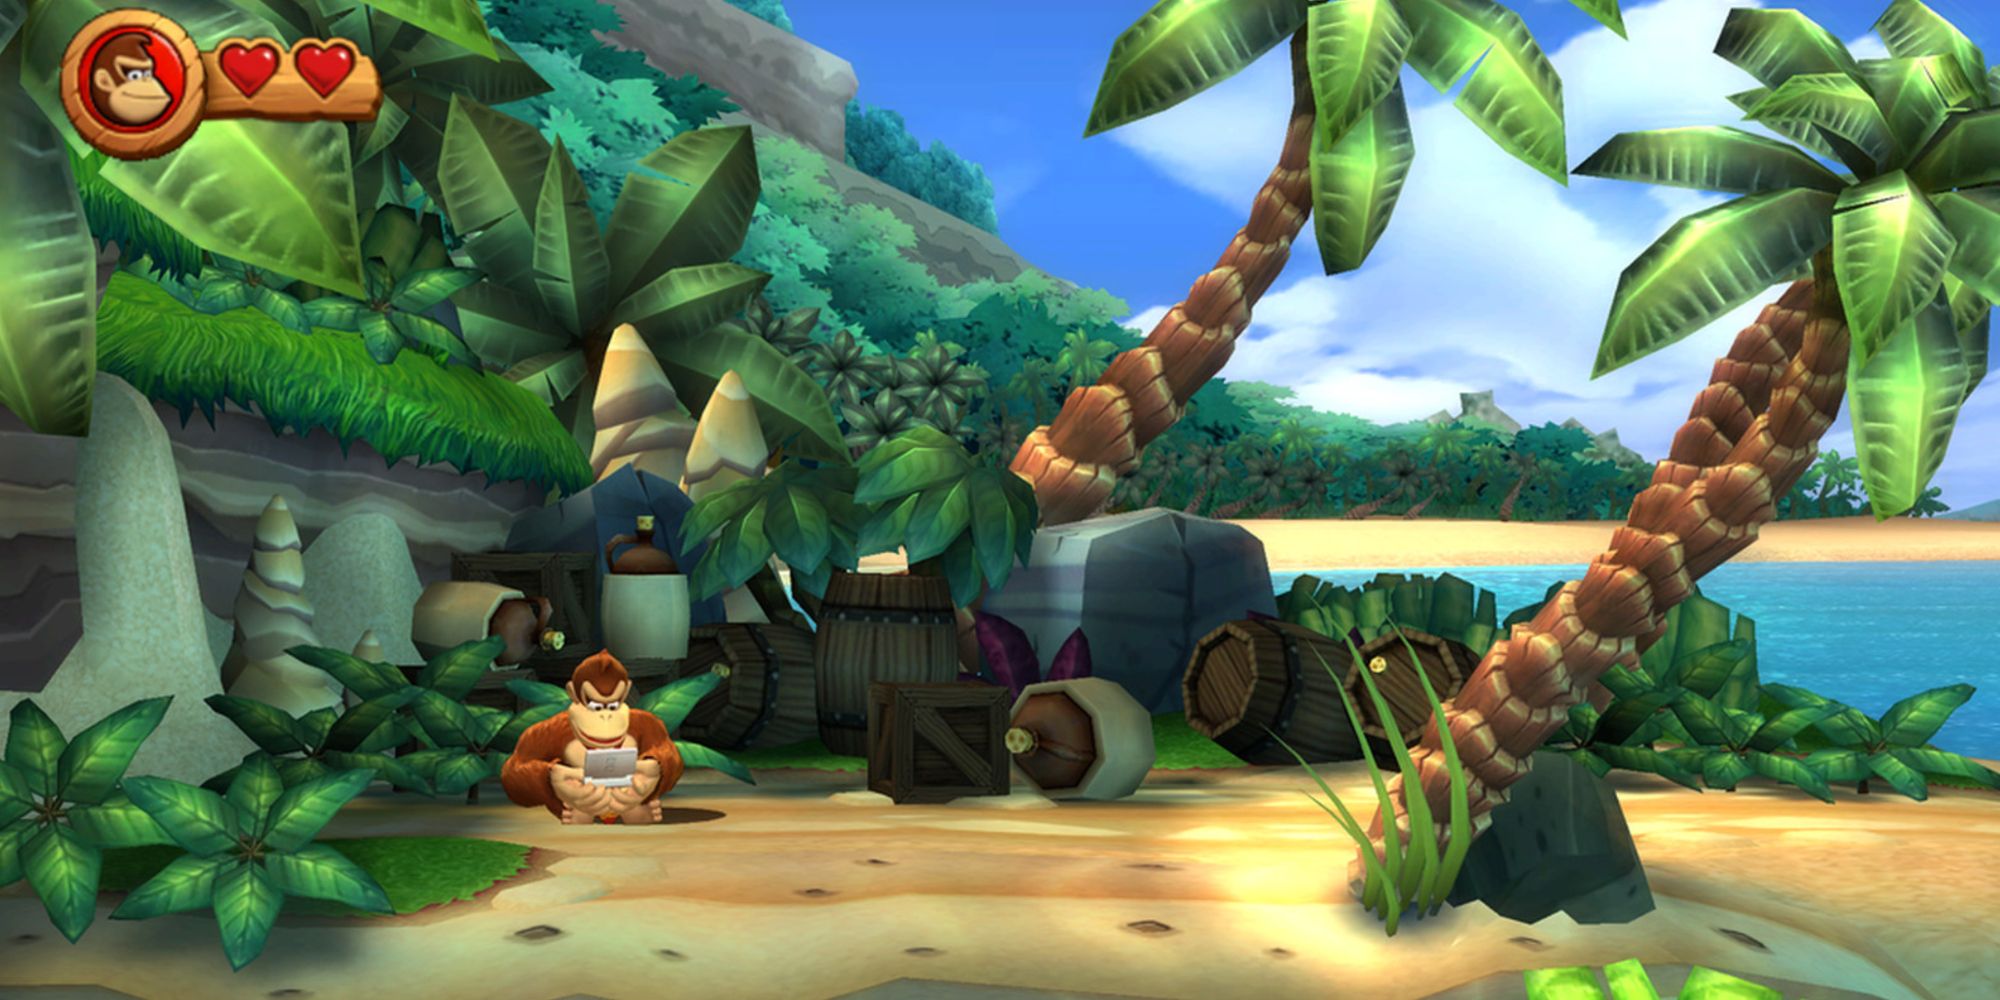 Donkey Kong sitting and playing a Nintendo 3DS on a sandy beach level in Donkey Kong Country Returns 3D